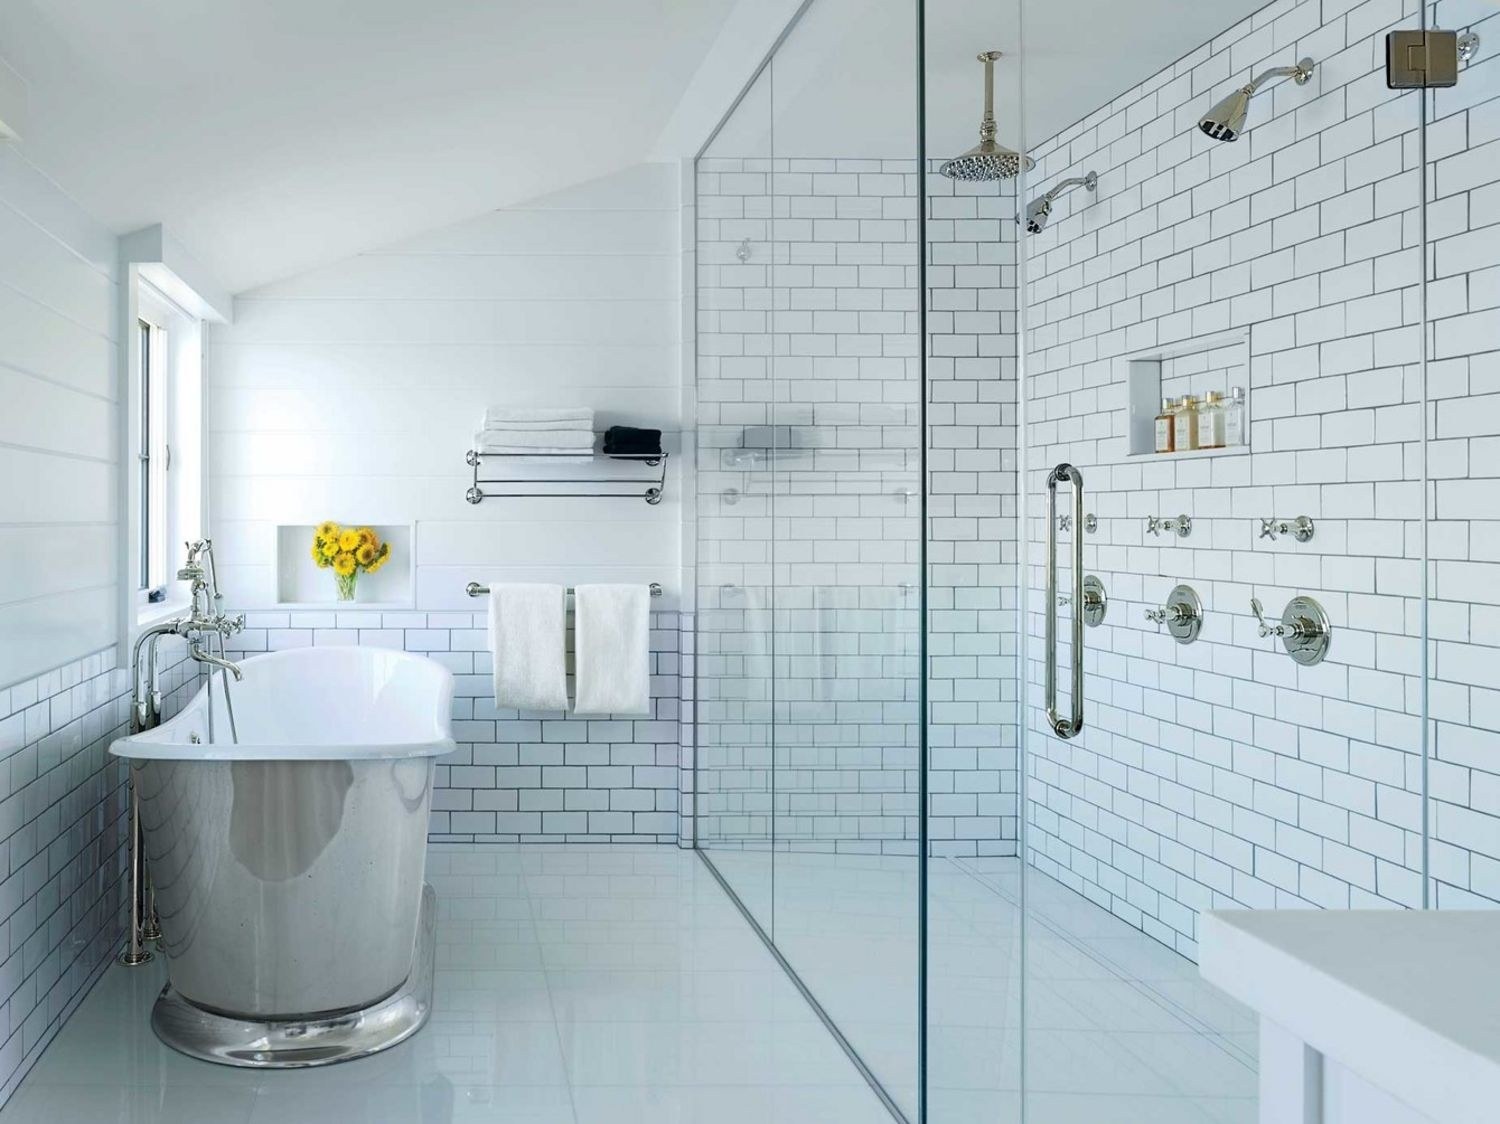 9 Space-Saving Ideas for Your Small Bathroom